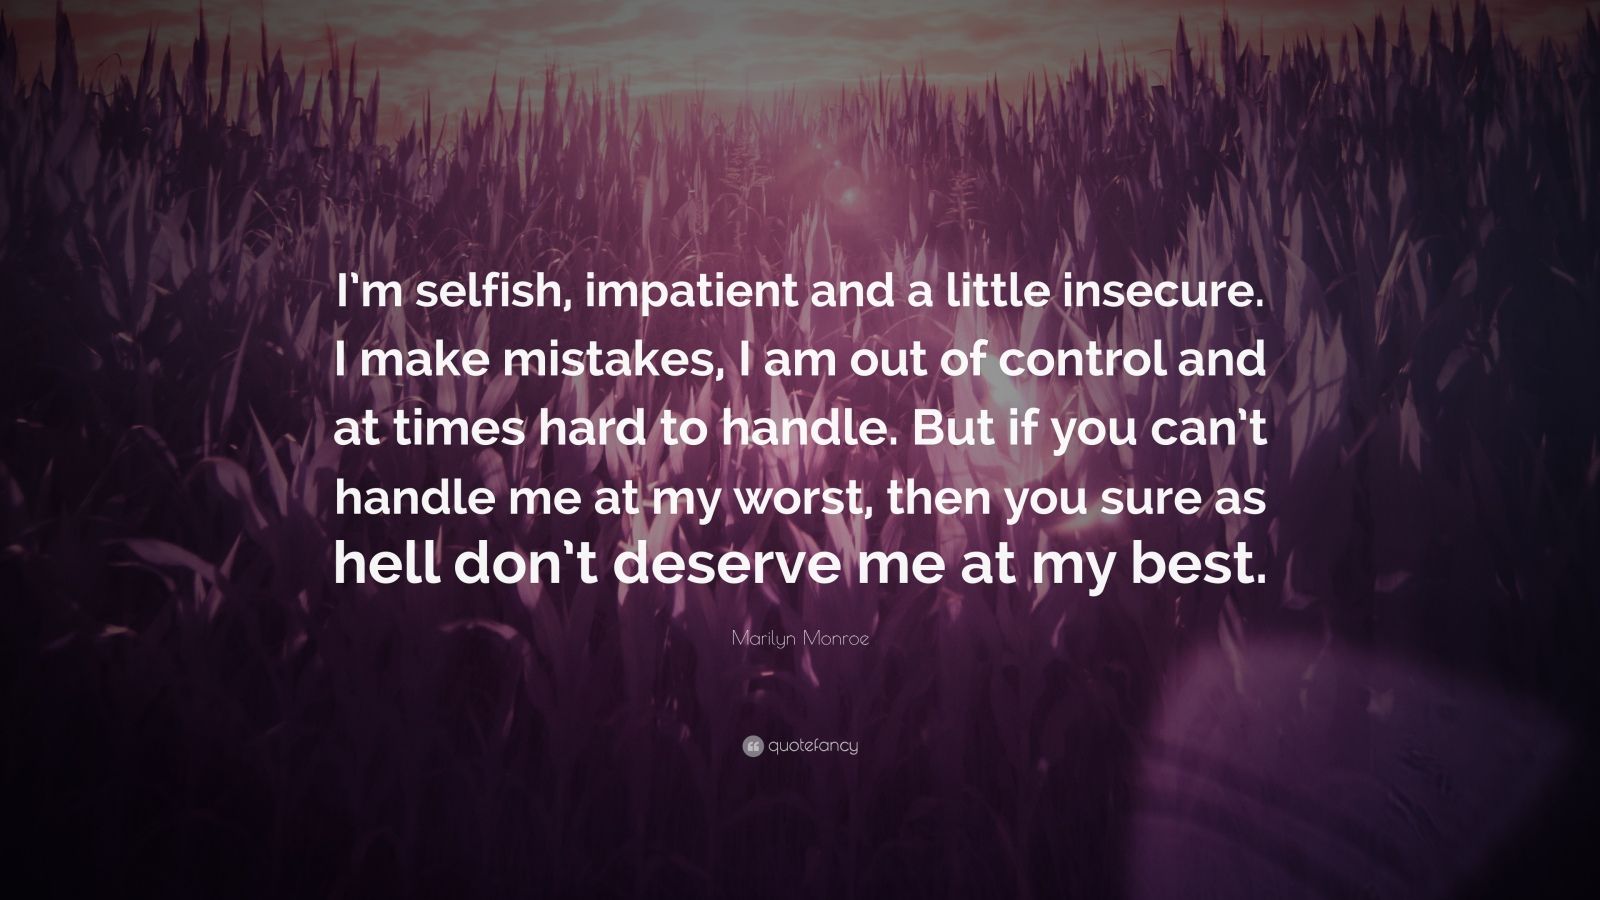 Marilyn Monroe Quote: “I’m selfish, impatient and a little insecure. I